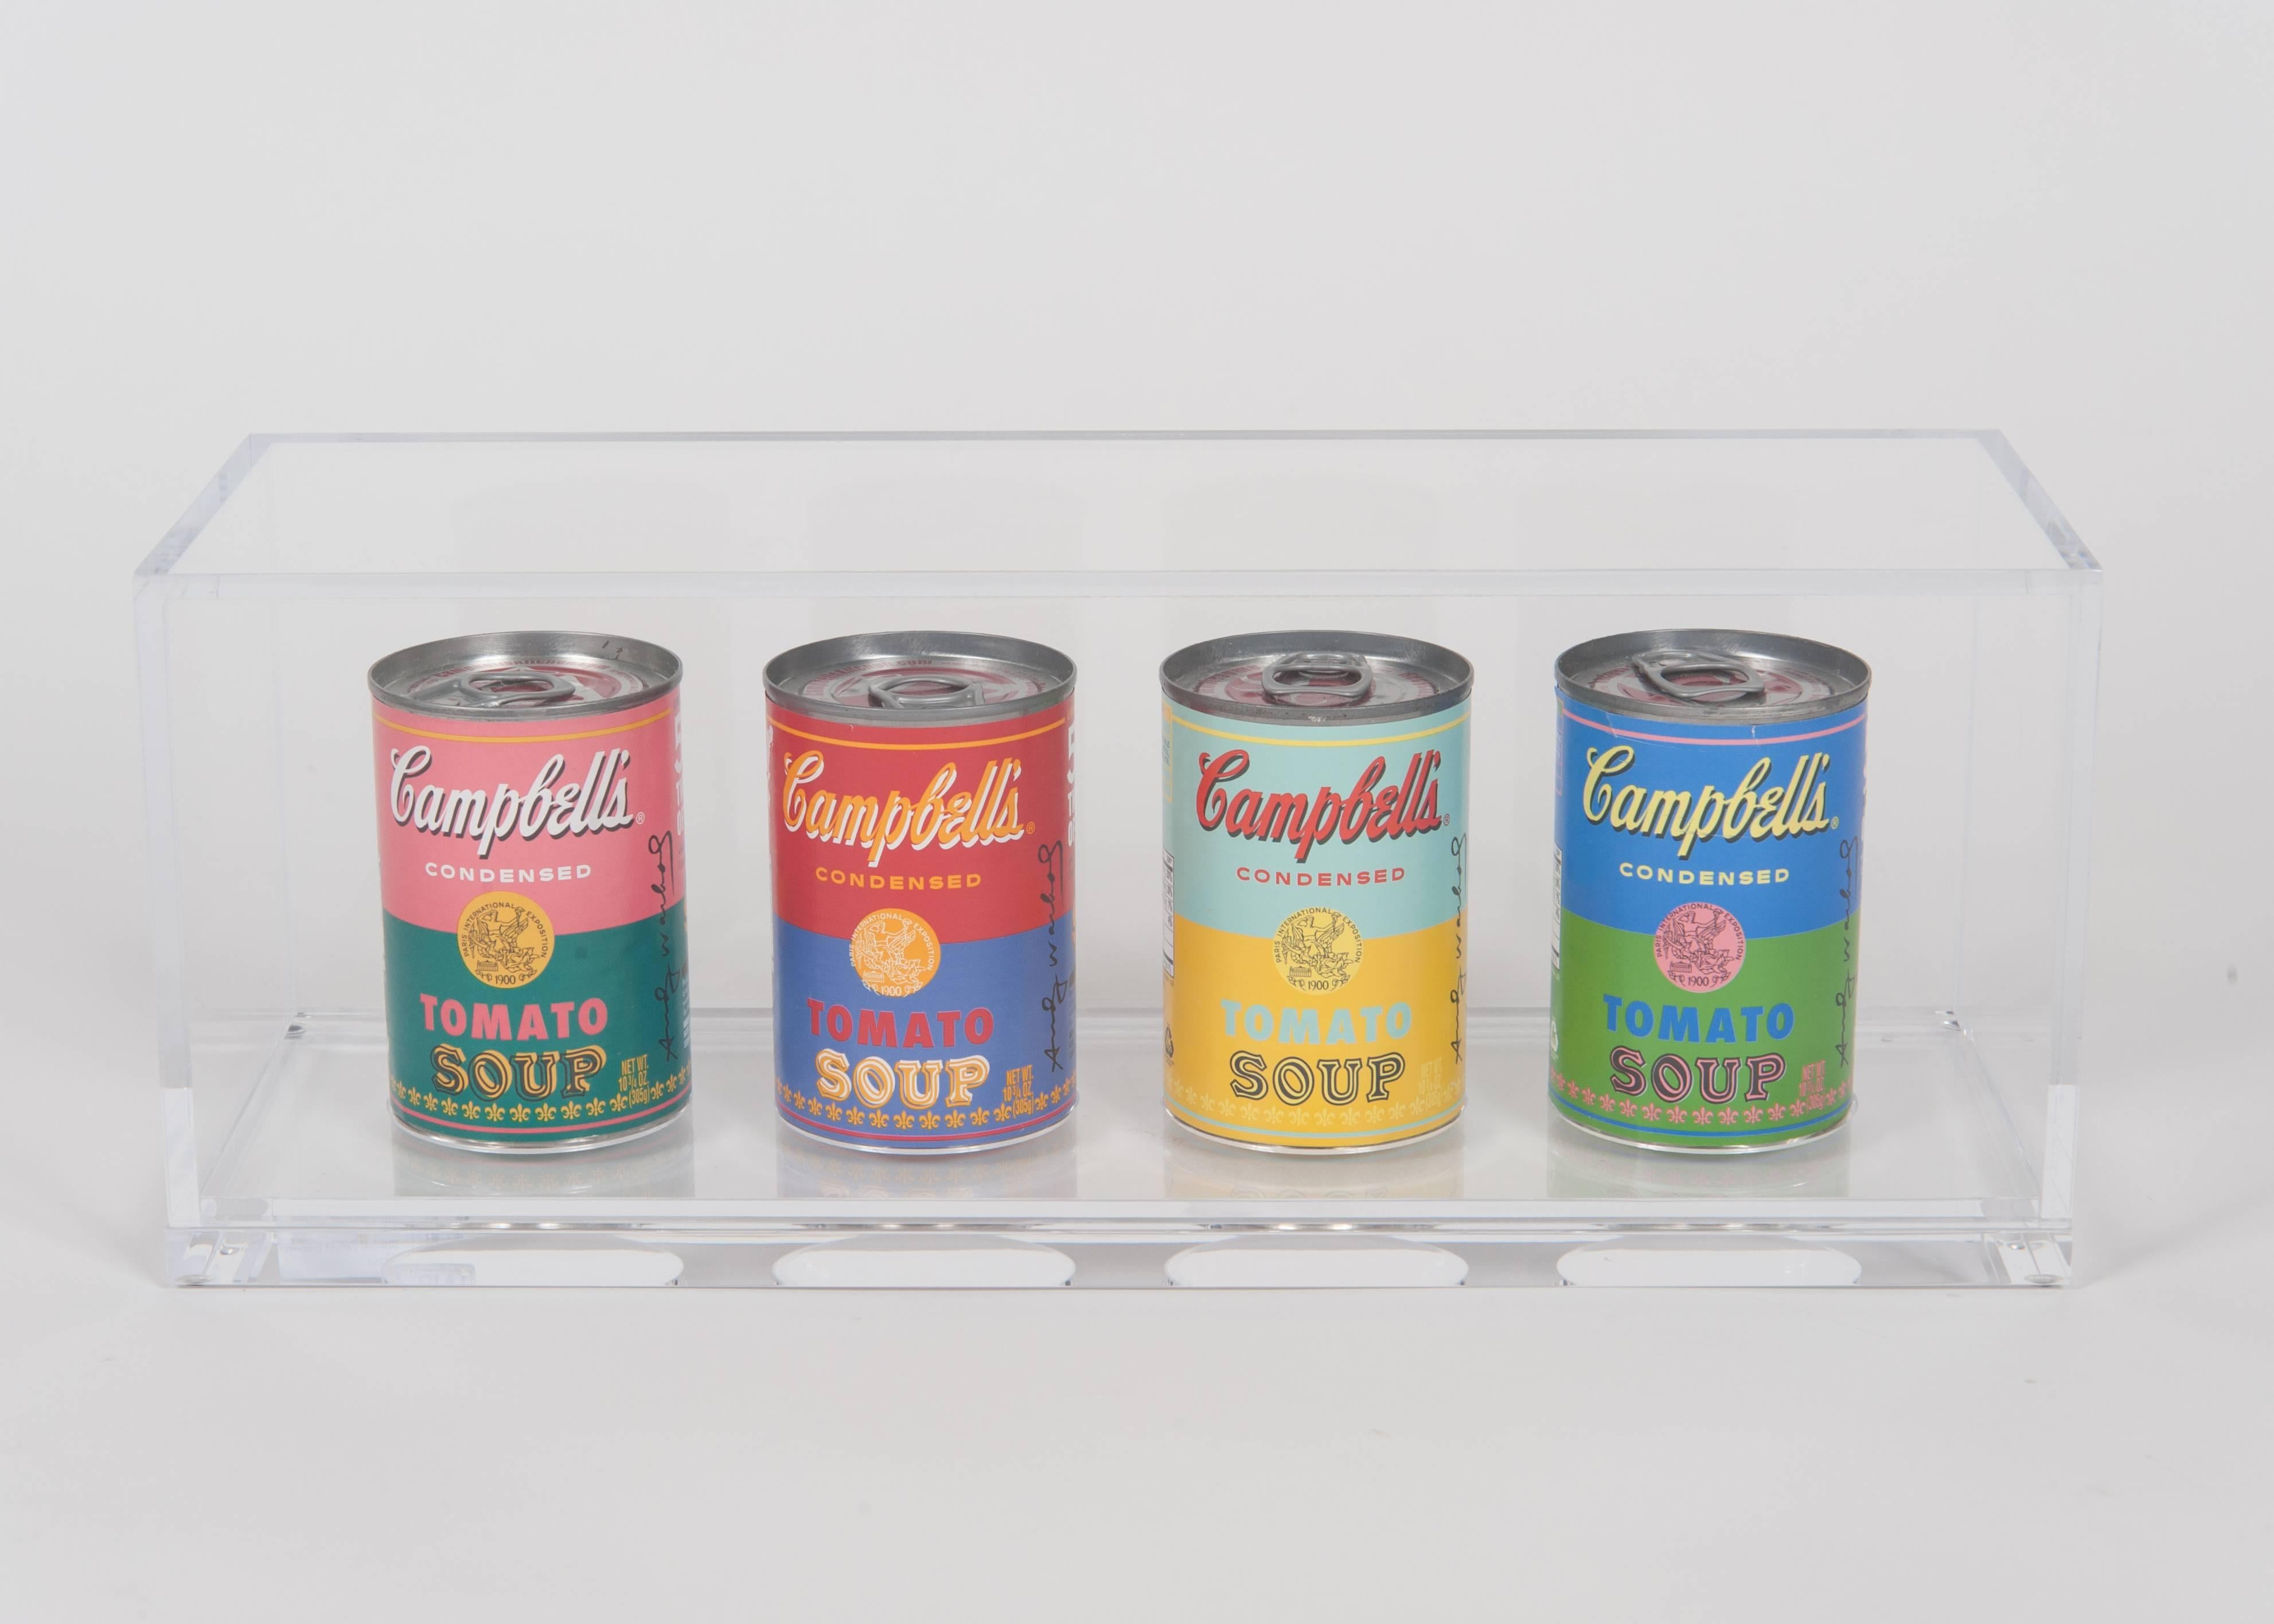 Andy Warhol for target limited edition Campbell soup four can display in custom acrylic display box. Two sets available.
Issued to celebrate the 50th anniversary of Warhol's first showing of his paintings of the soup cans. The labels come in four